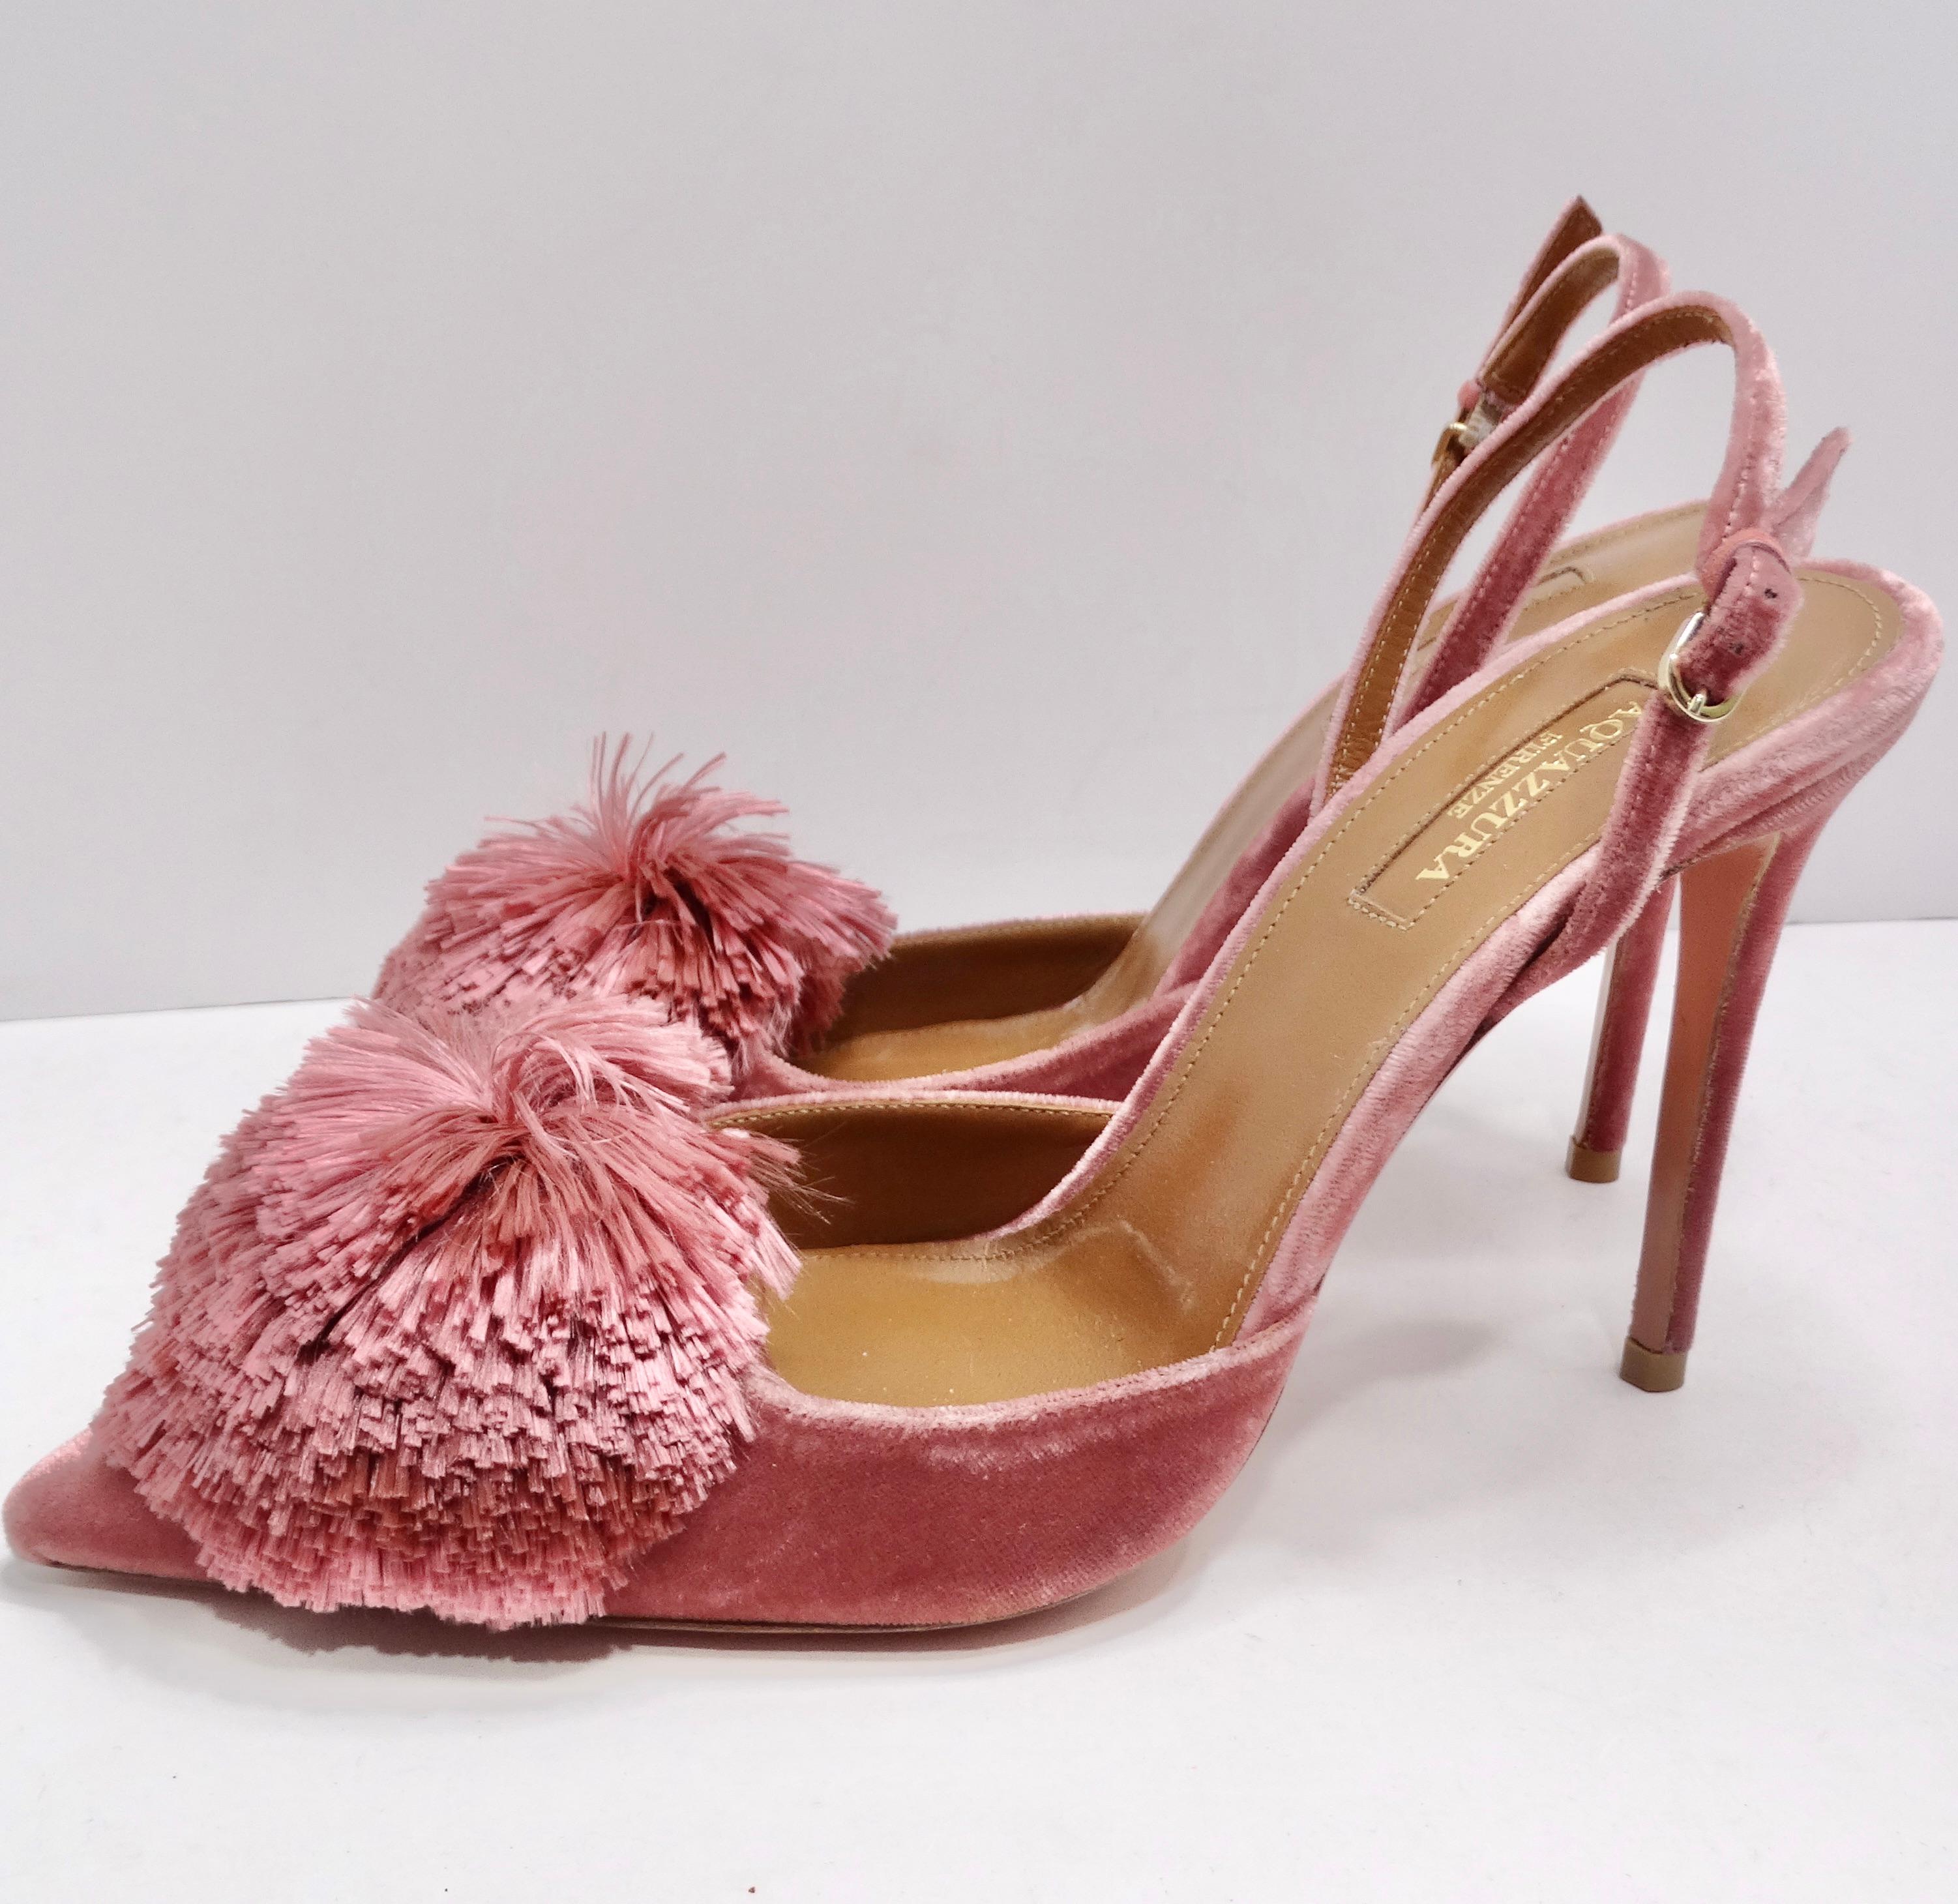 Introducing the Aquazzura Powder Puff Slingback Heels—a captivating pair that seamlessly marries elegance with a playful touch. These light pink velvet slingback heels aren't just footwear; they're a wearable work of art designed for those who